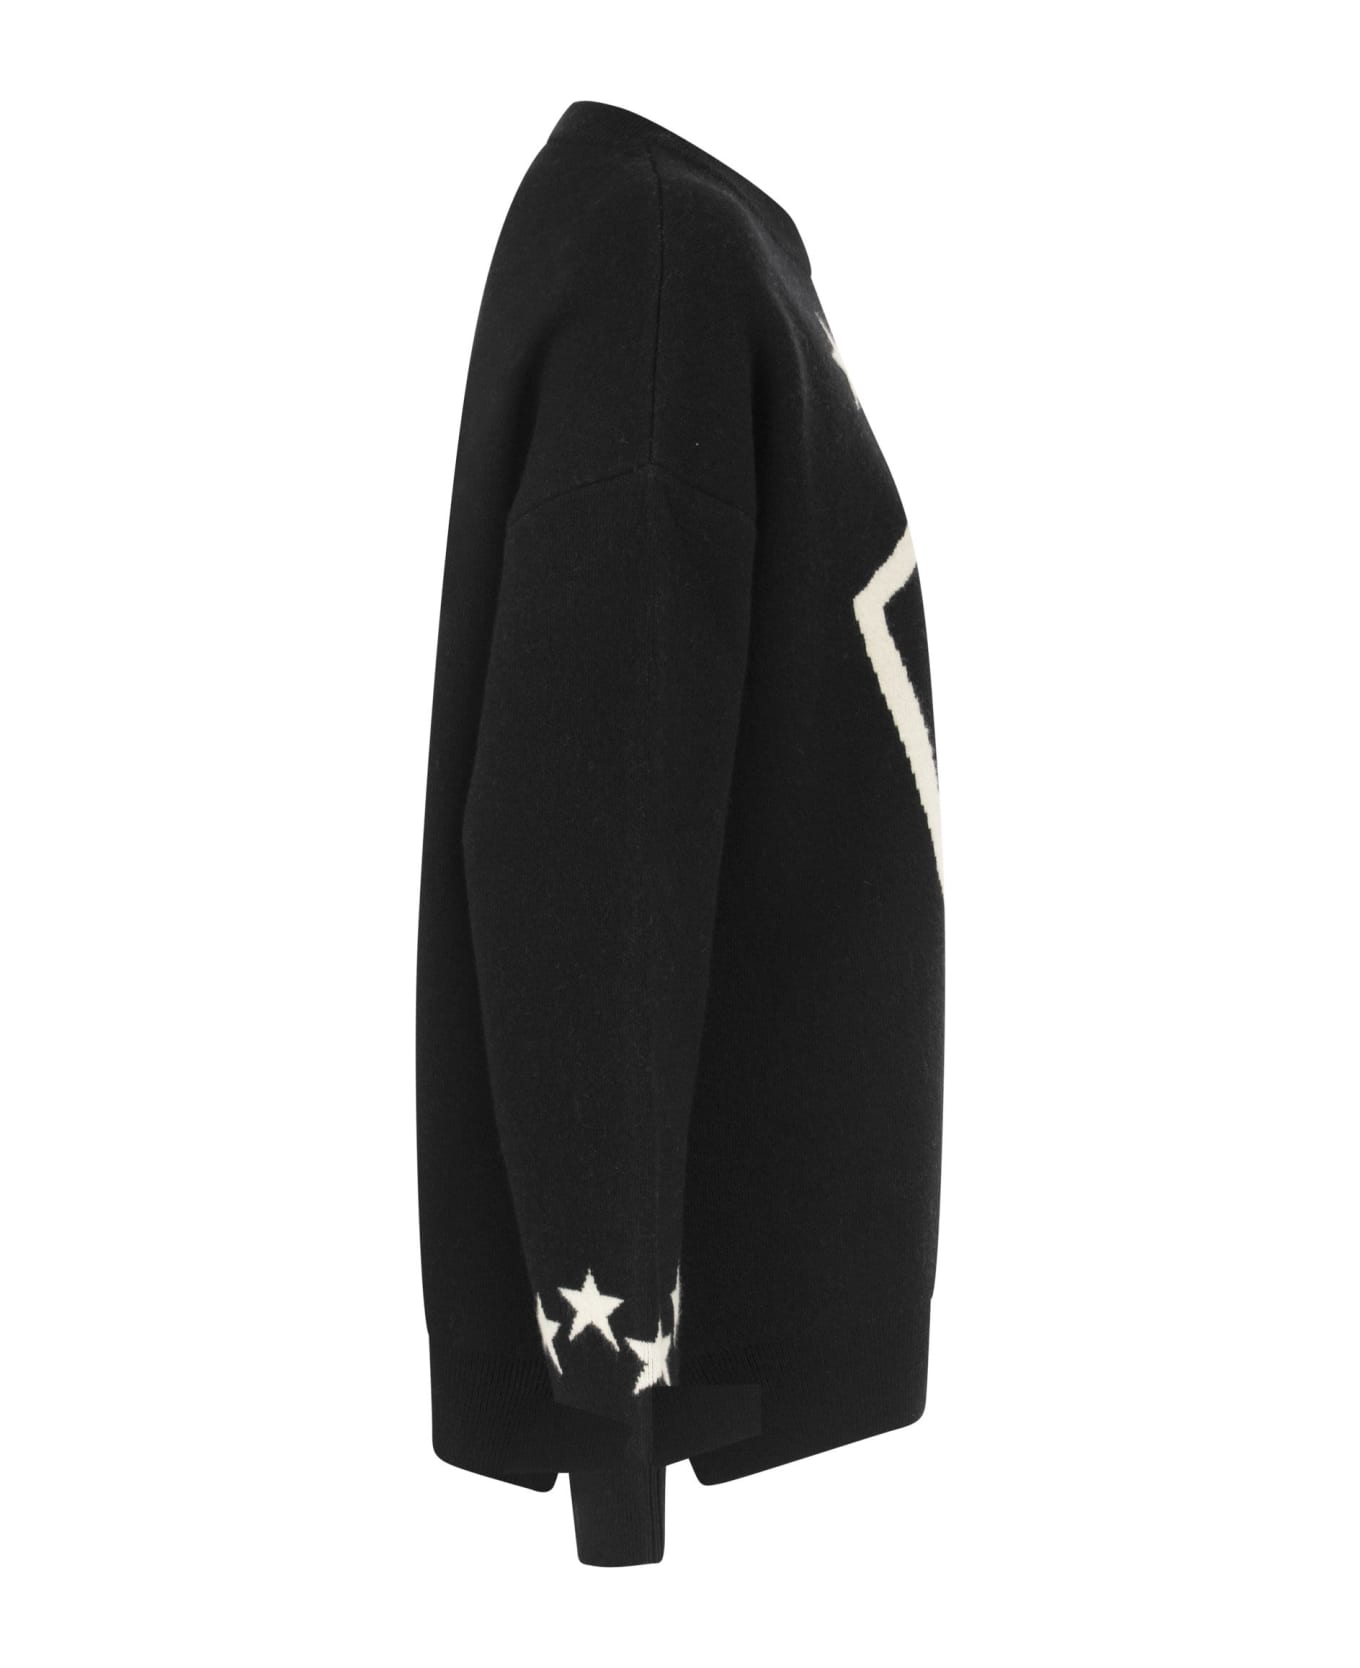 Etro Jacquard Jersey With Heraldic Coat Of Arms - Black